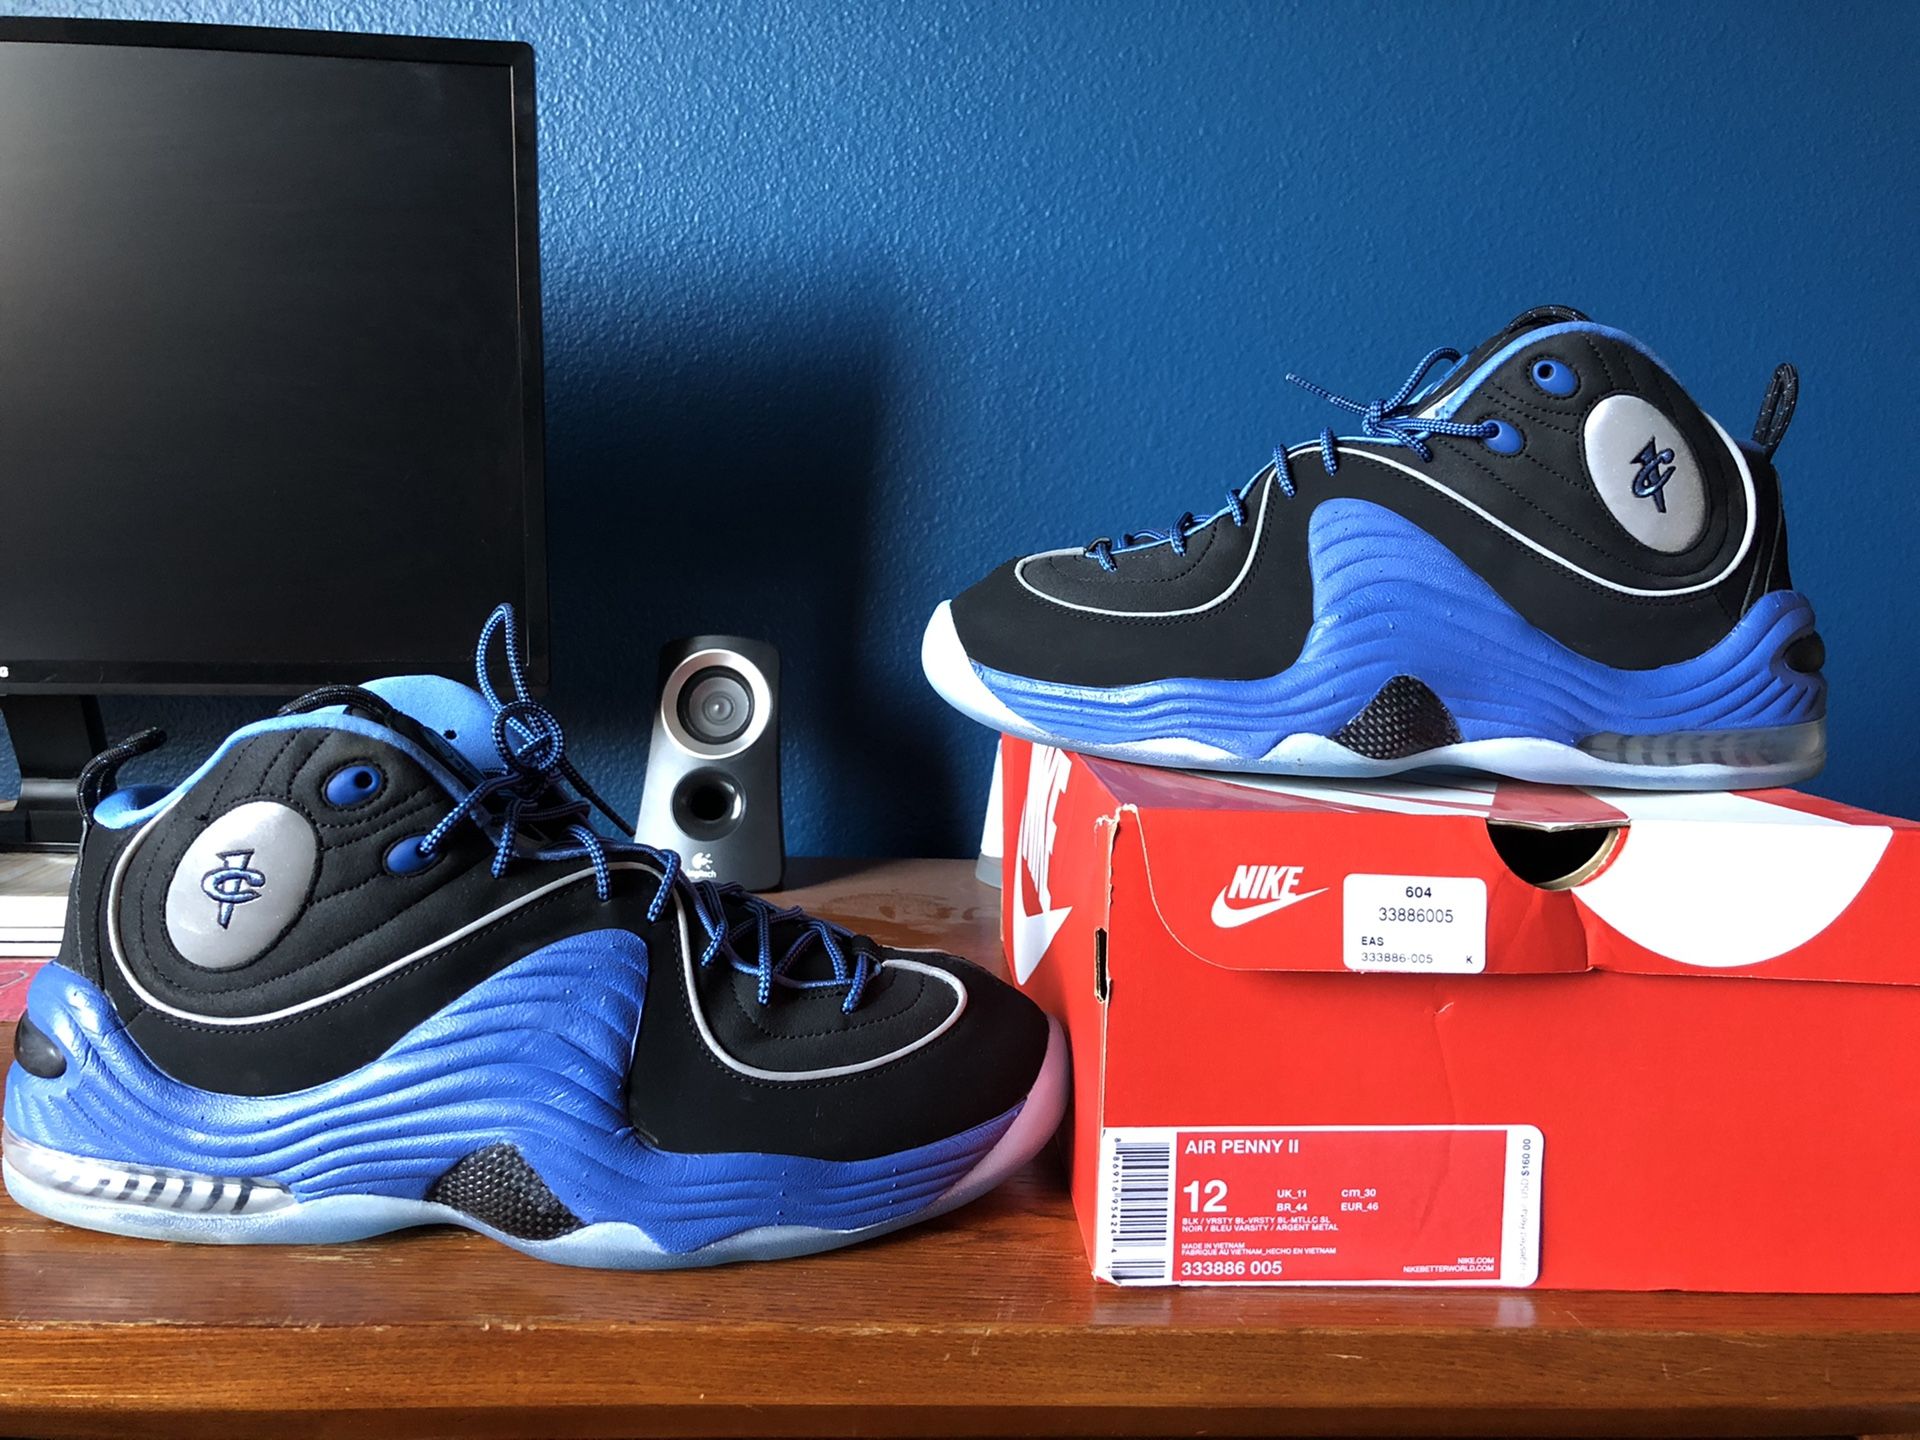 Nike penny 2 size 12 blue black sole collector colors